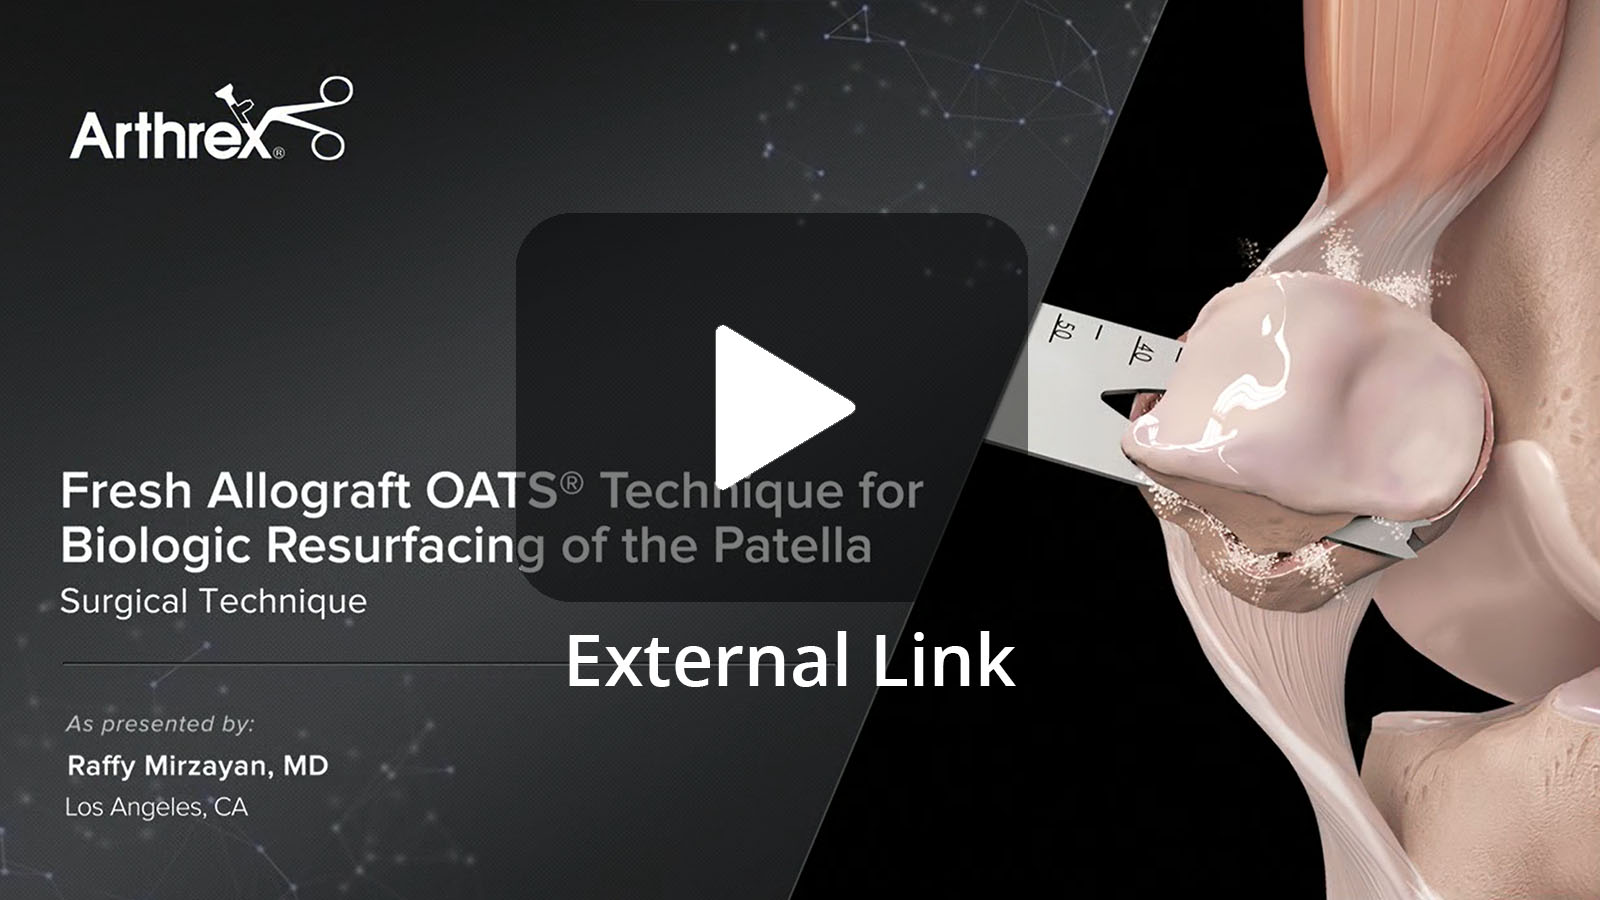 Raffy Mirzayan, MD, (Los Angeles, CA) performs a complete resurfacing of the patella with a osteochondral allograft. Dr. Mirzayan includes multiple technical pearls for donor and recipient side preparations. (External Link)